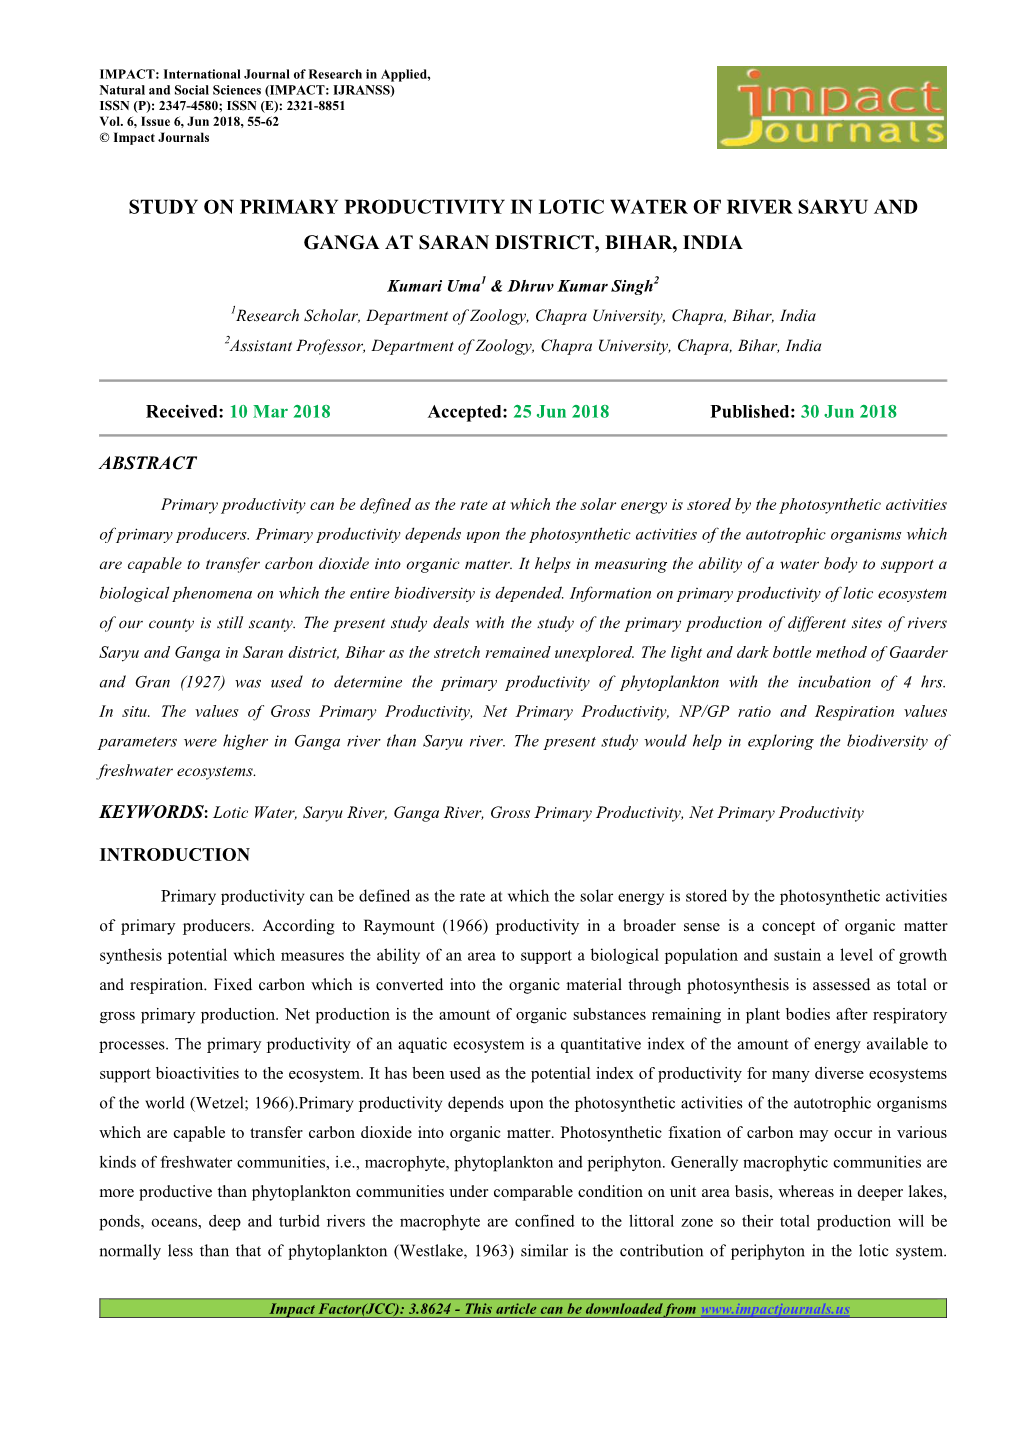 Study on Primary Productivity in Lotic Water of River Saryu and Ganga at Saran District, Bihar, India